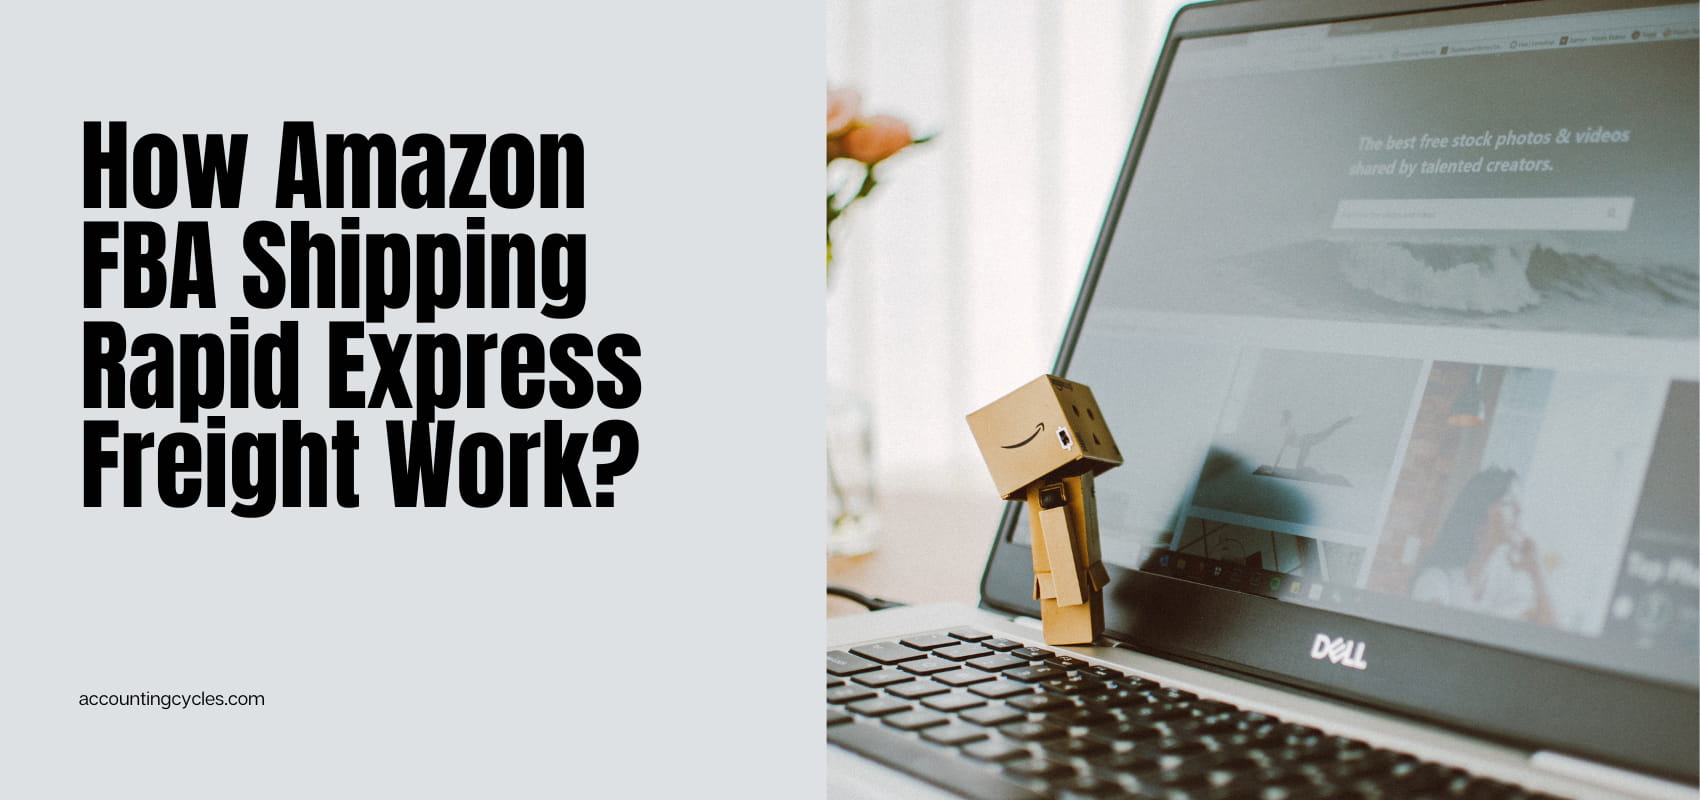 How Amazon FBA Shipping Rapid Express Freight Work?